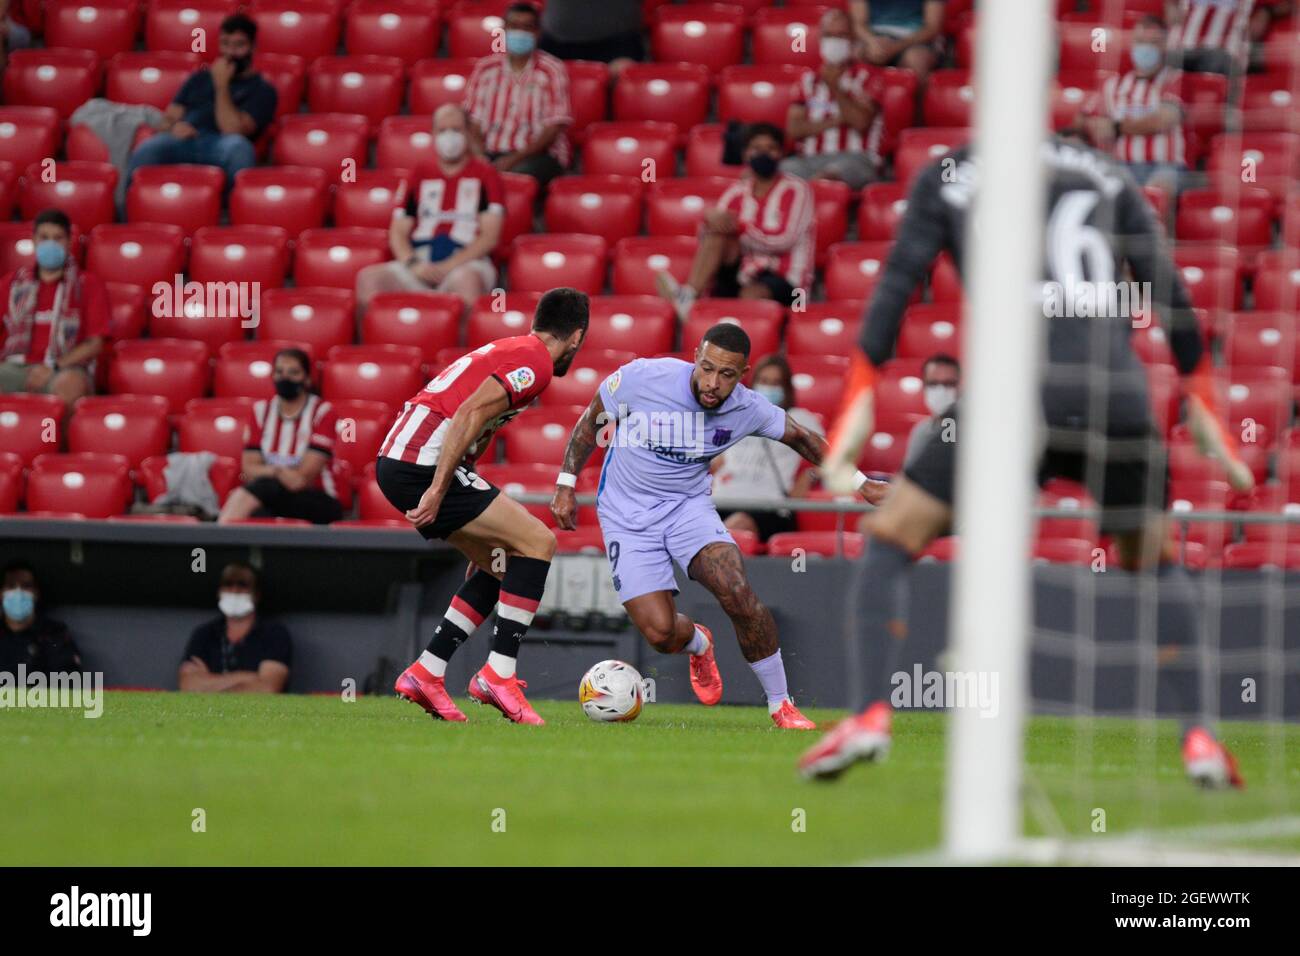 Bilbao Basque Country Spain 21st Aug 21 Memphis Depay 9 Of Fc Barcelona Tries To Dribble During The La Liga Week 2 Game Between Athletic Club And Fc Barcelona At San Mames